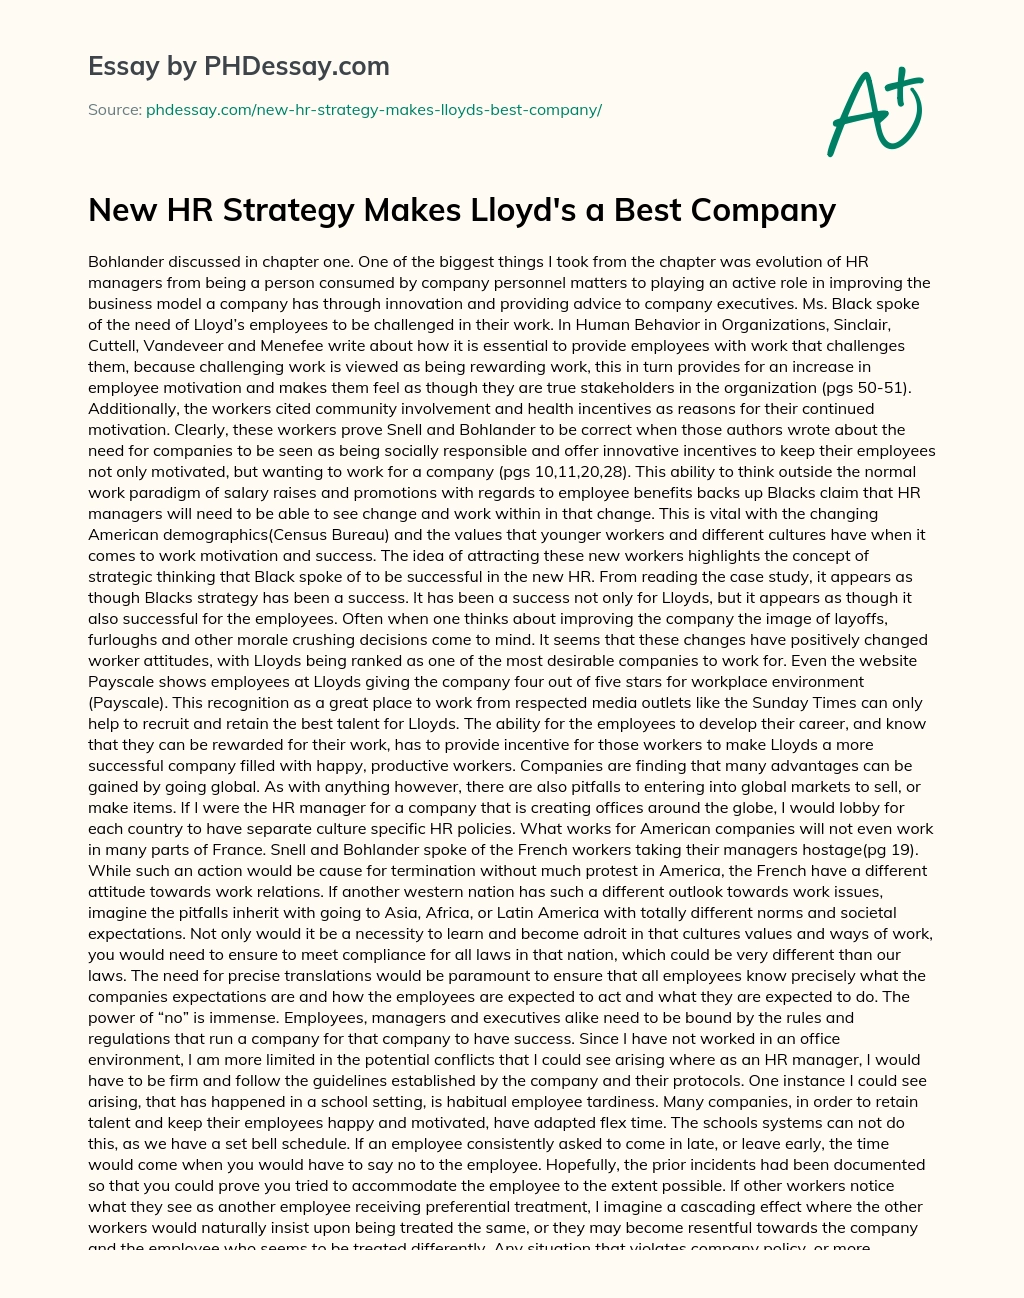 New HR Strategy Makes Lloyd’s a Best Company essay